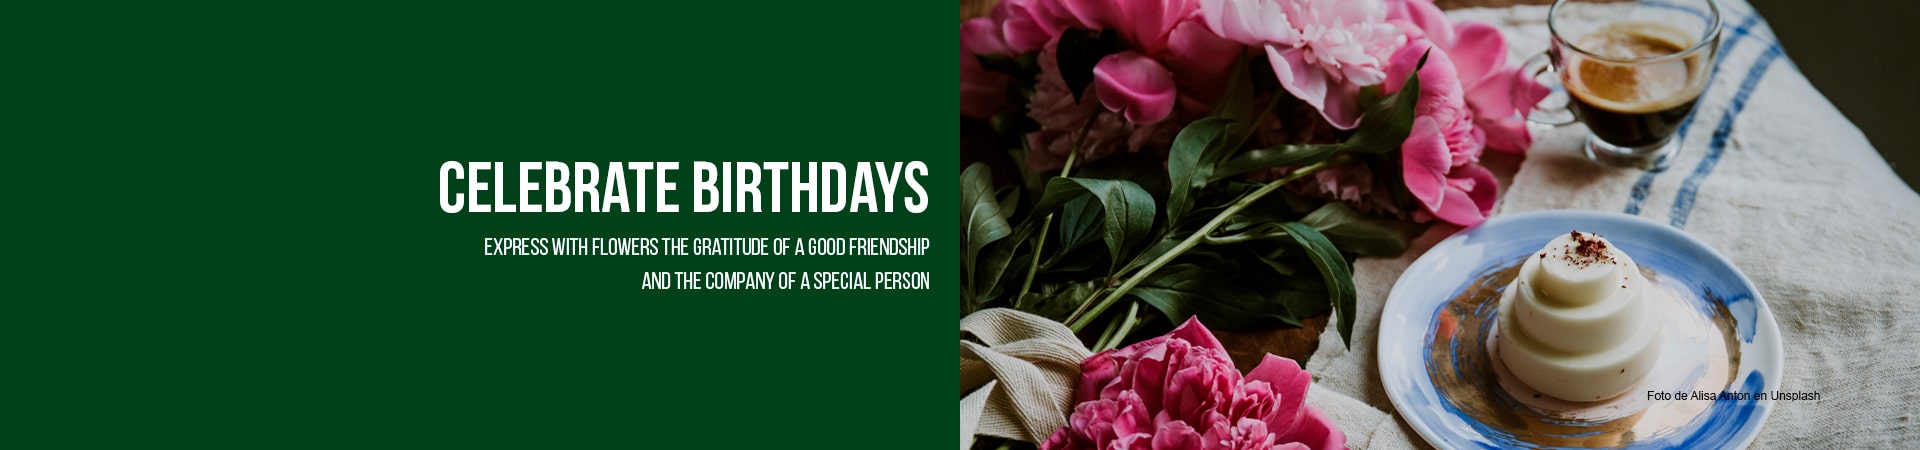 Gift flowers for birthdays. Our flowers from Fresh Flowers Orlando as birthday gifts are the perfect way to show how much you care on their special day. Flower delivery in Orlando FL